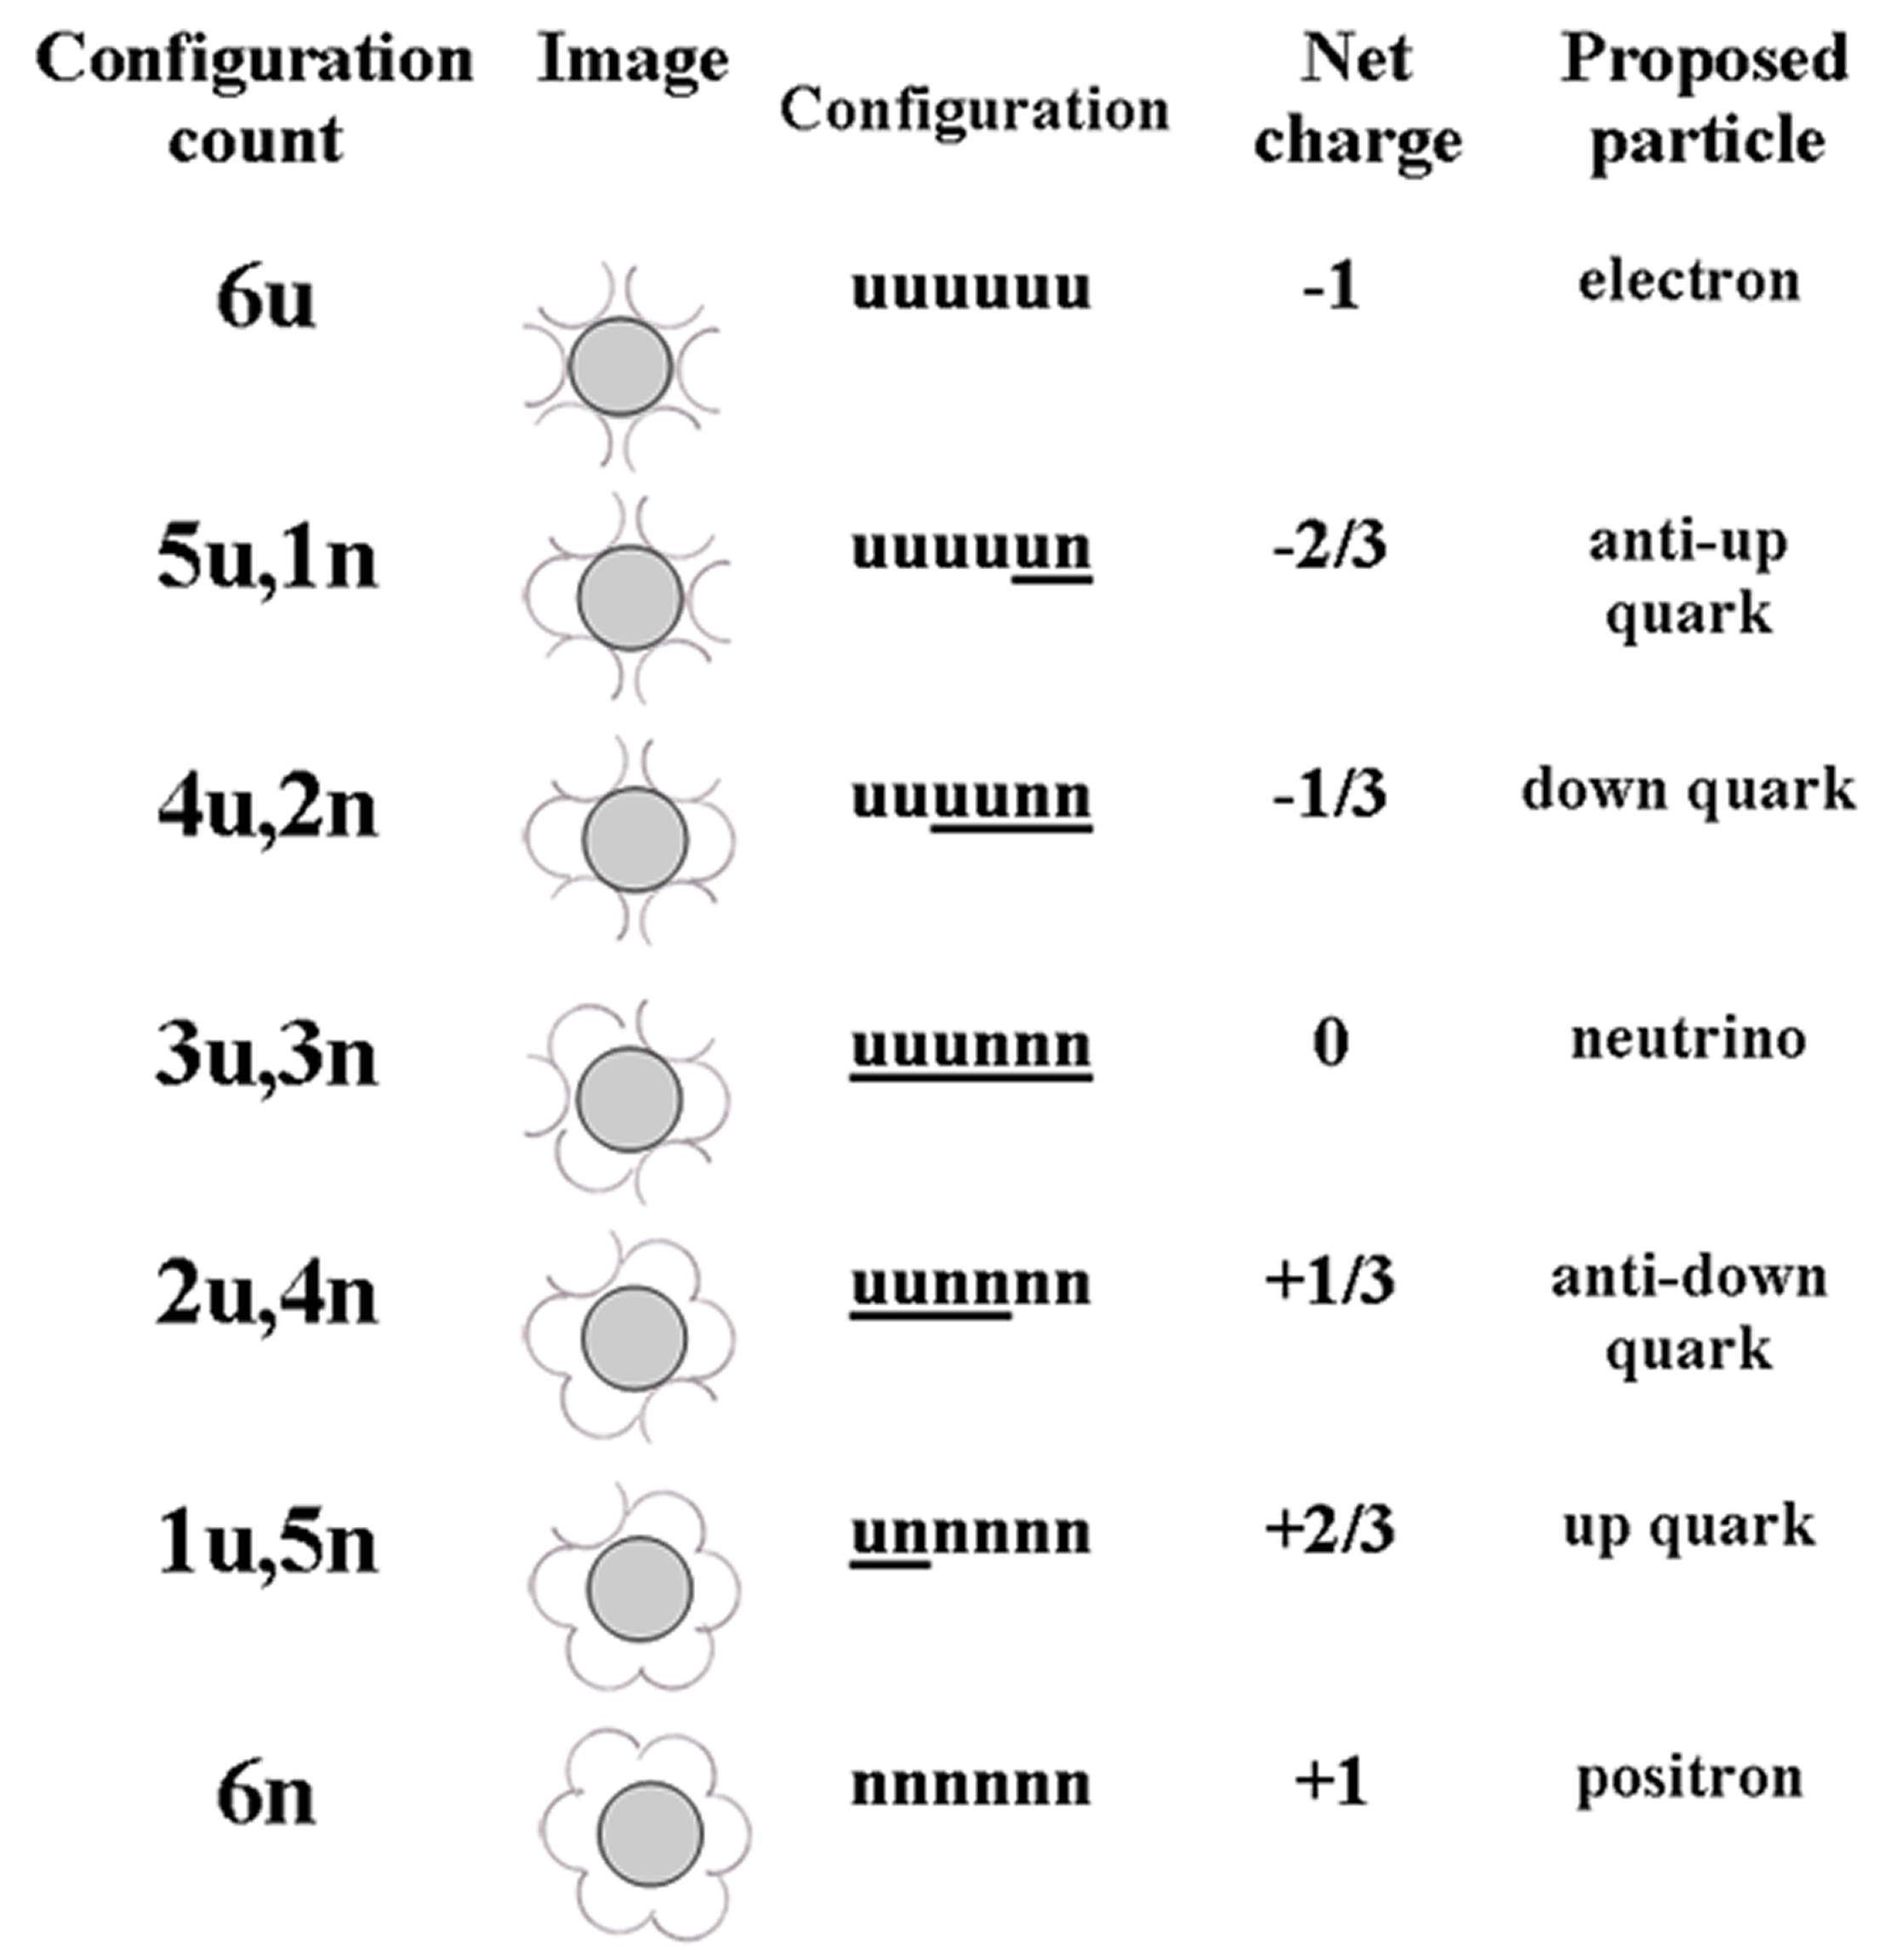 Table of elementary particles based on spin orientation